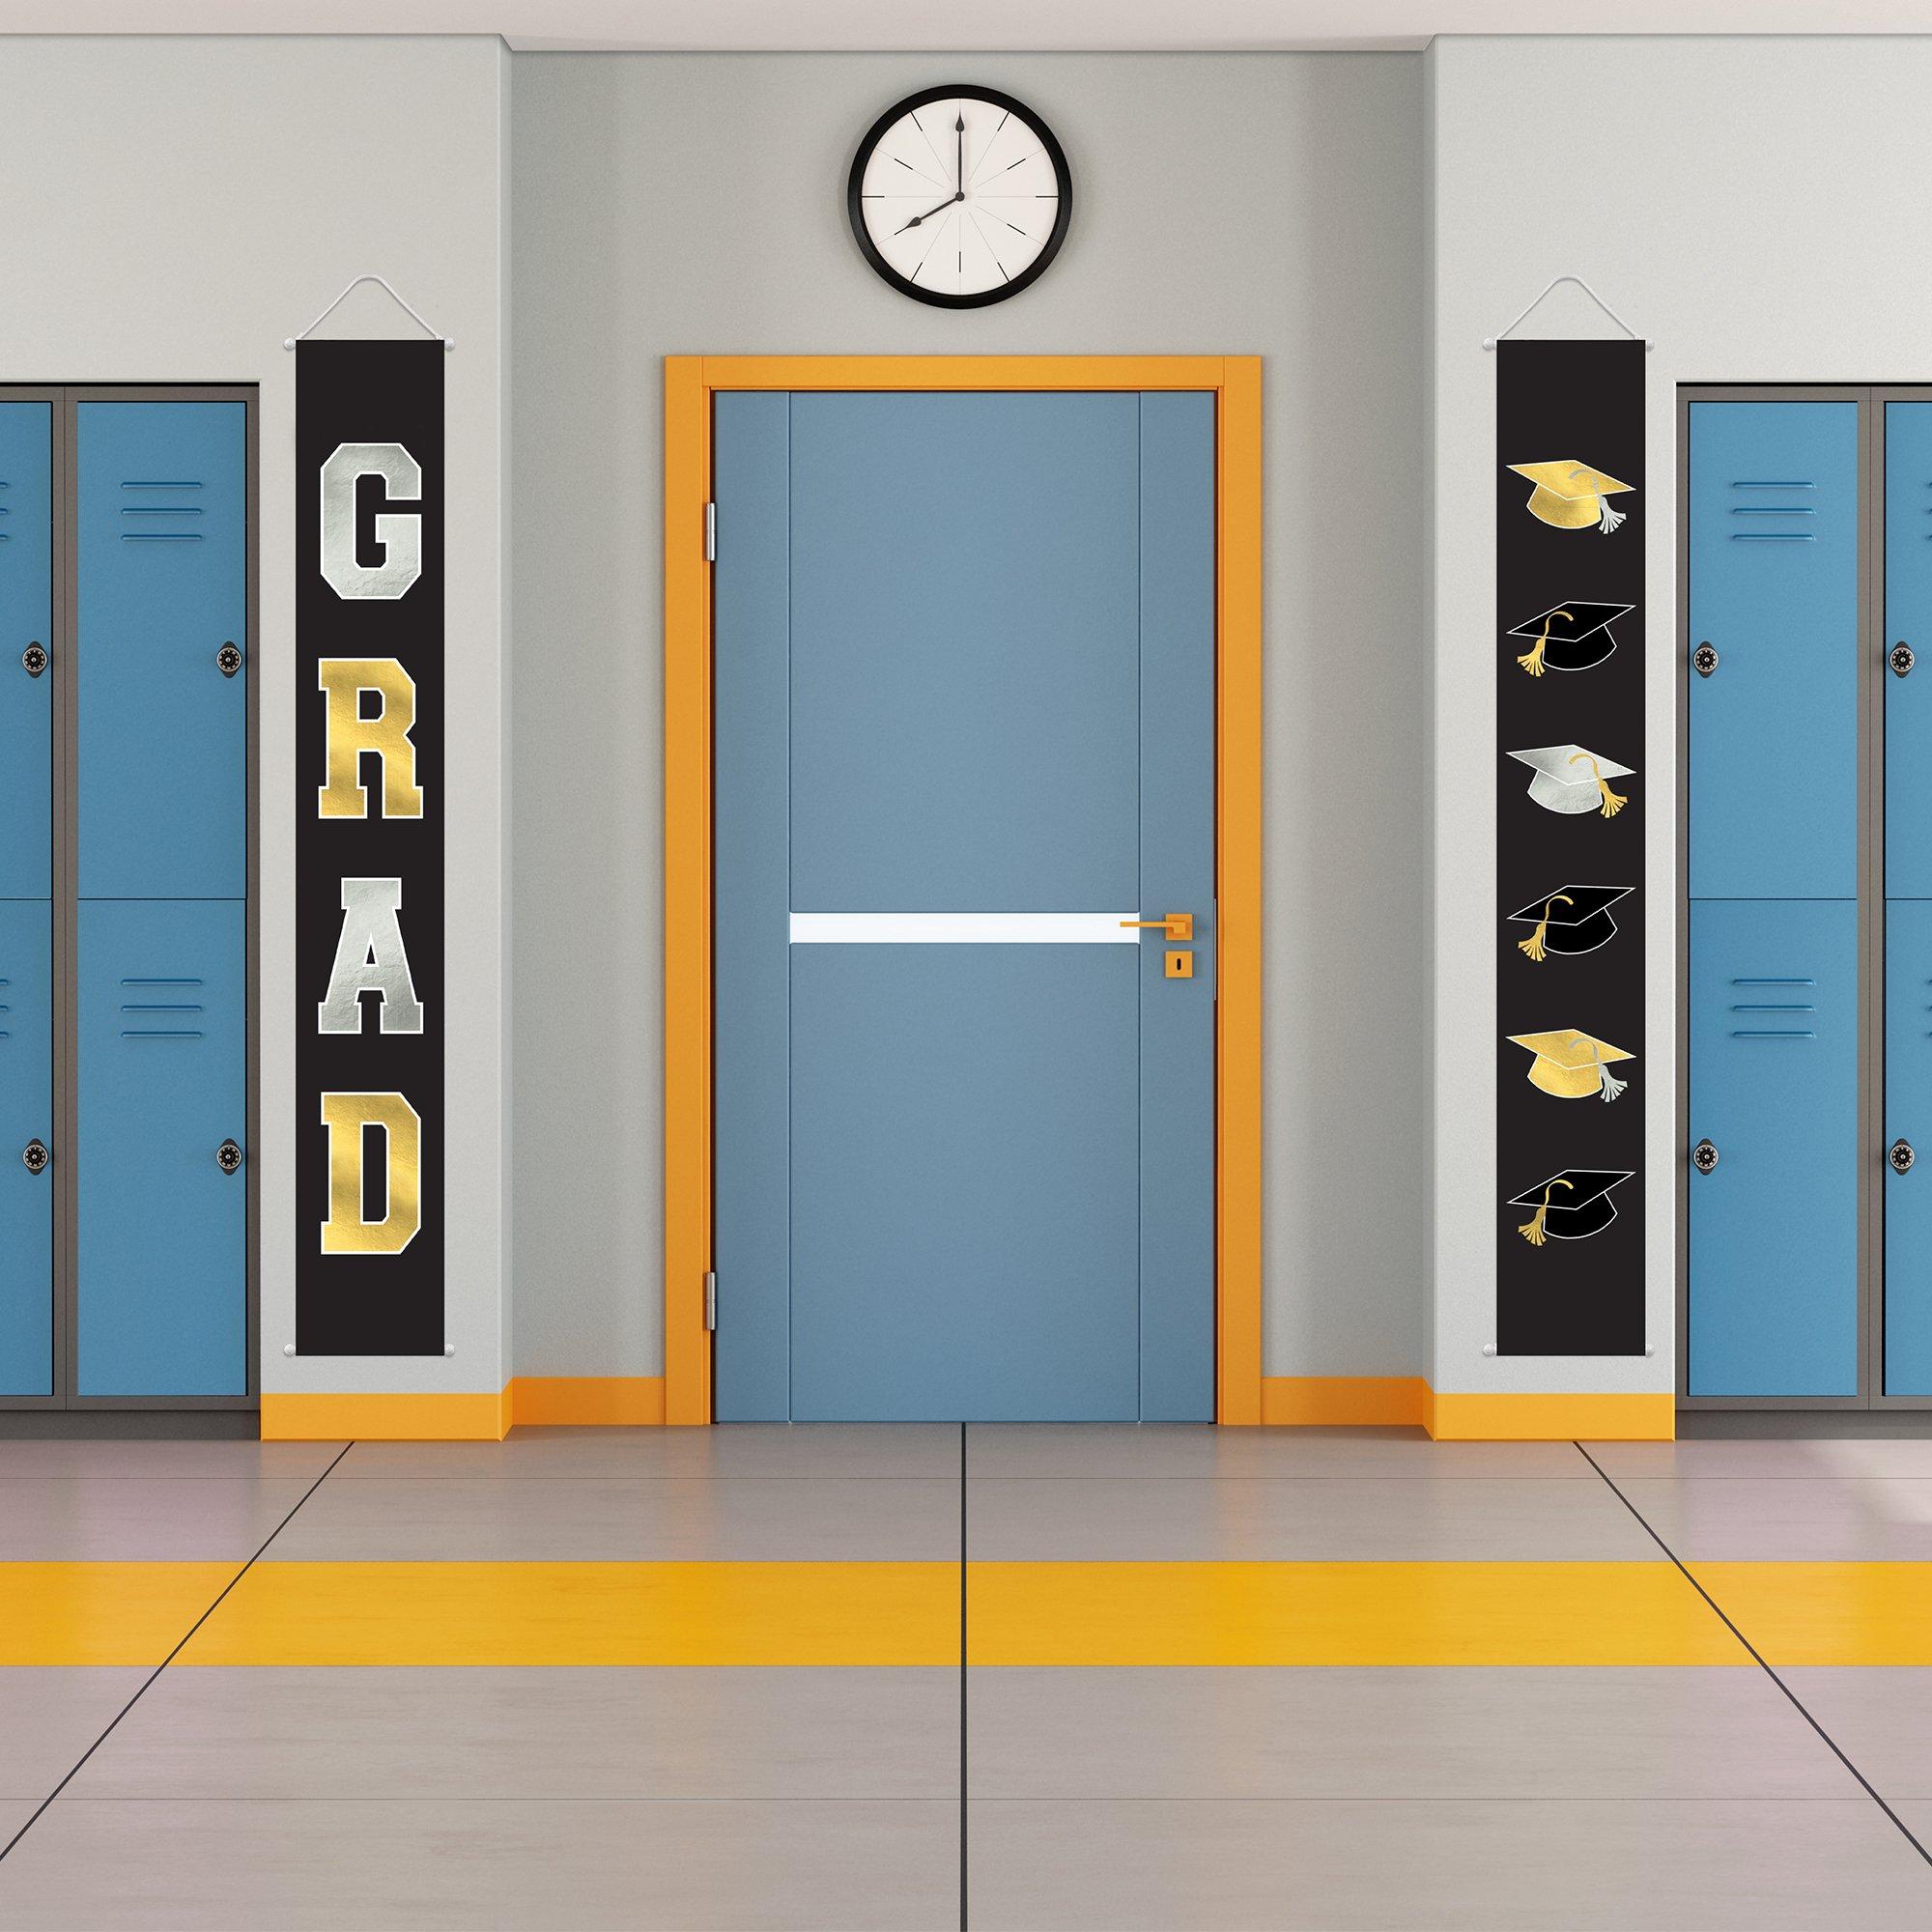 Black, Silver & Gold Graduation Fabric Vertical Banners, 1.1ft x 6ft, 2ct